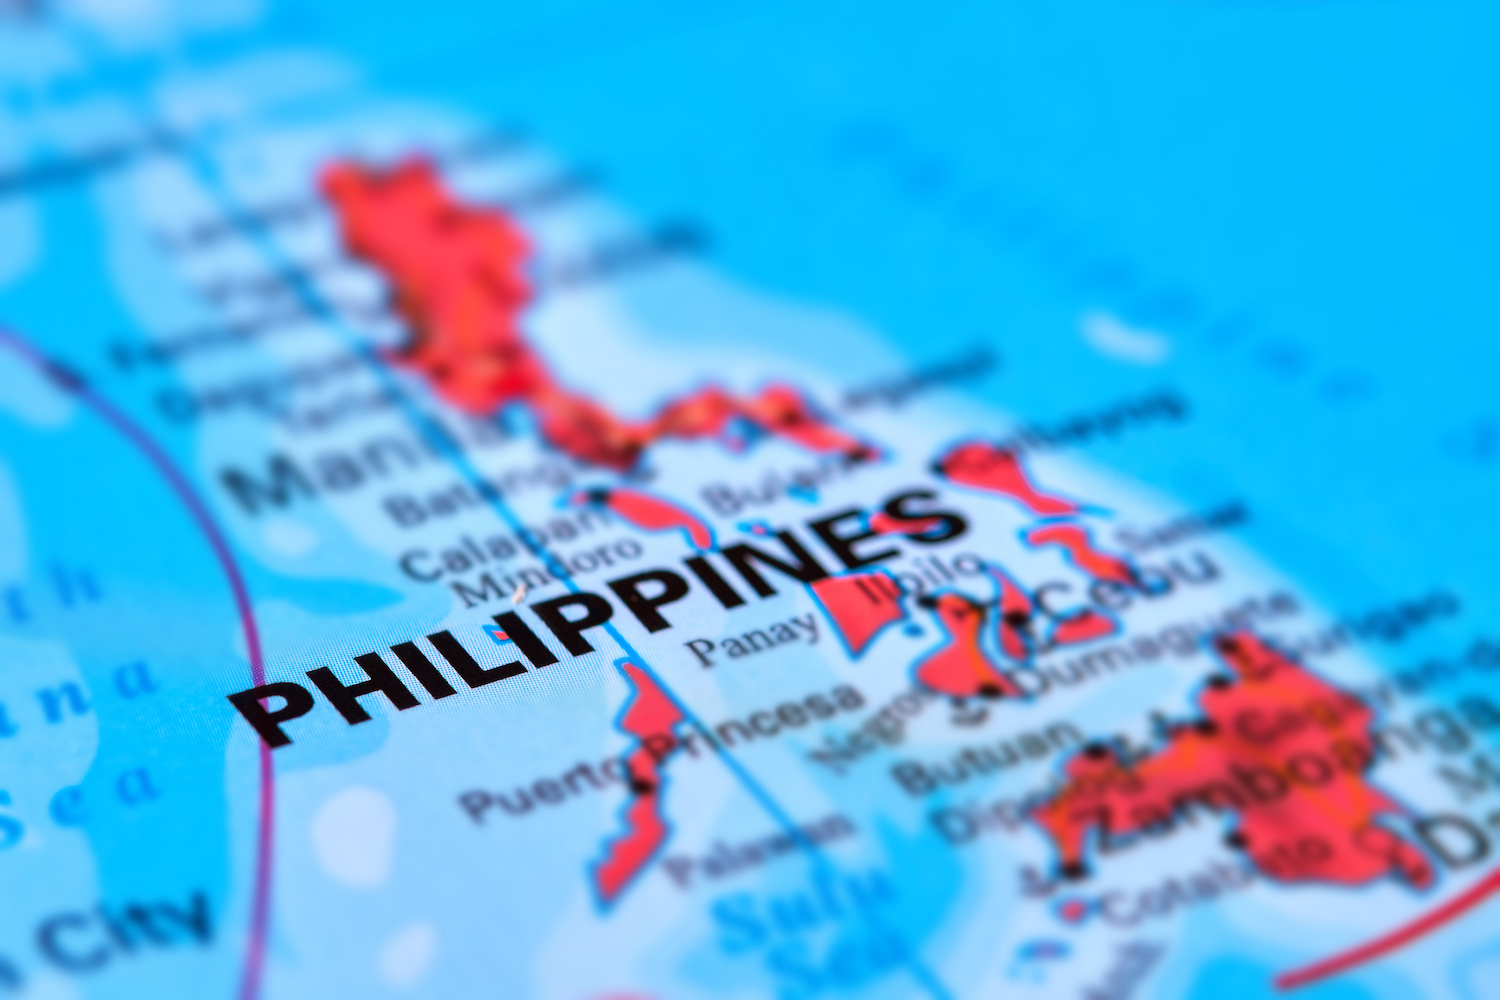 Philippines’ UnionBank Launches Stablecoin, Conducts The Country’s First Bank Blockchain Transaction